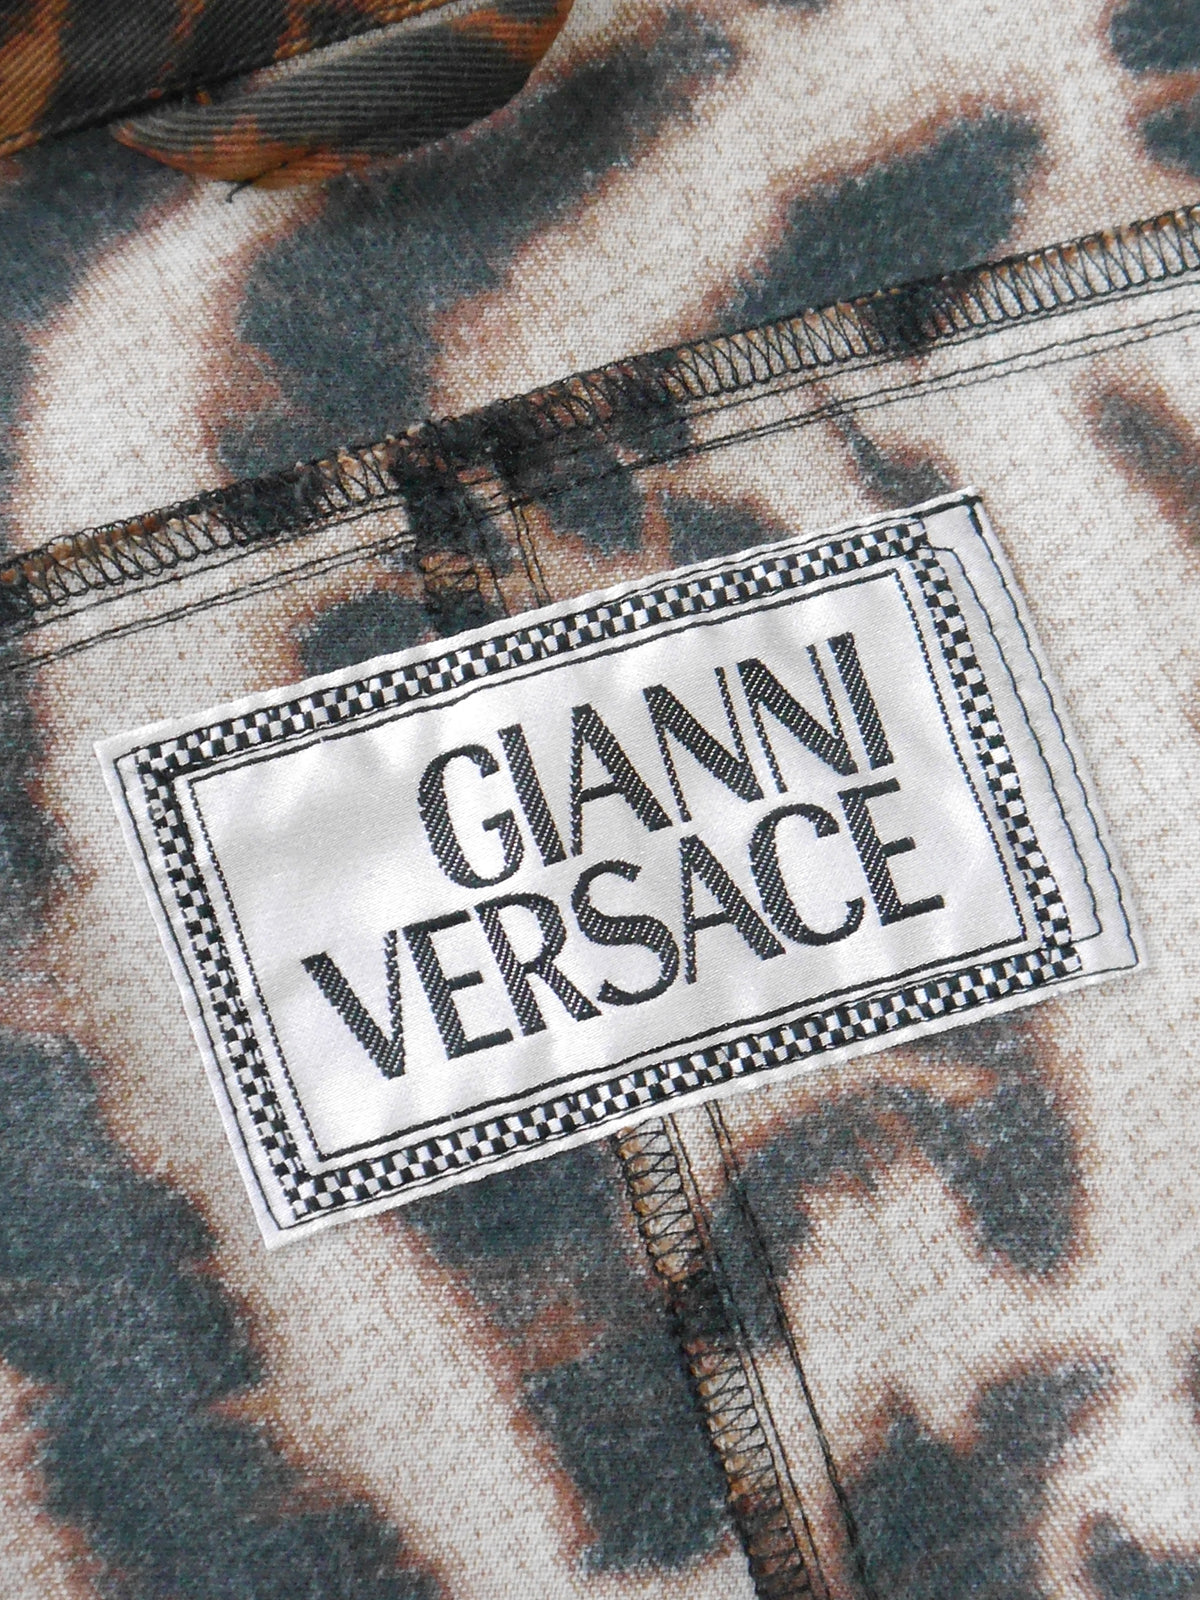 GIANNI VERSACE Spring 1992 Cropped Denim Jacket w/ Leopard Print Size XS-S // Sold